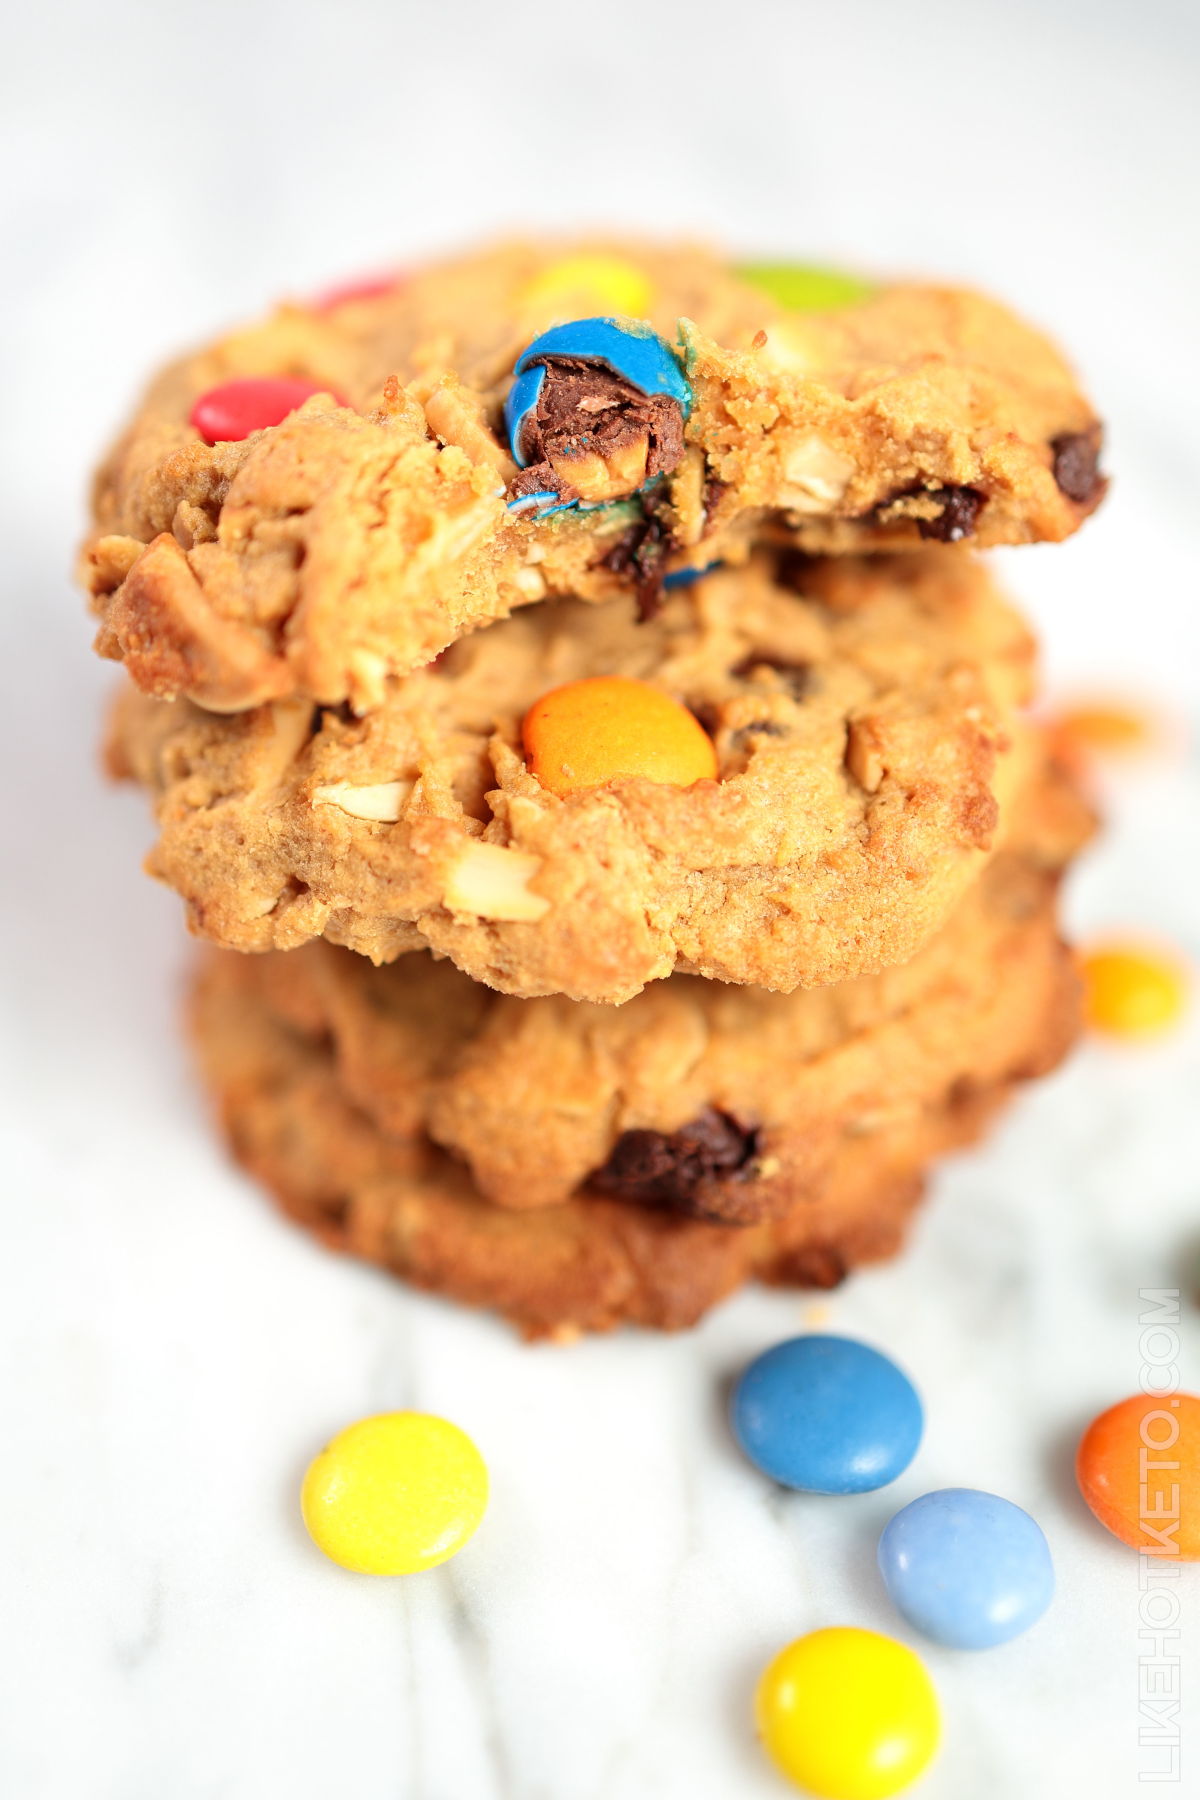 A pile of lupin flour monster cookies with keto M&M's.